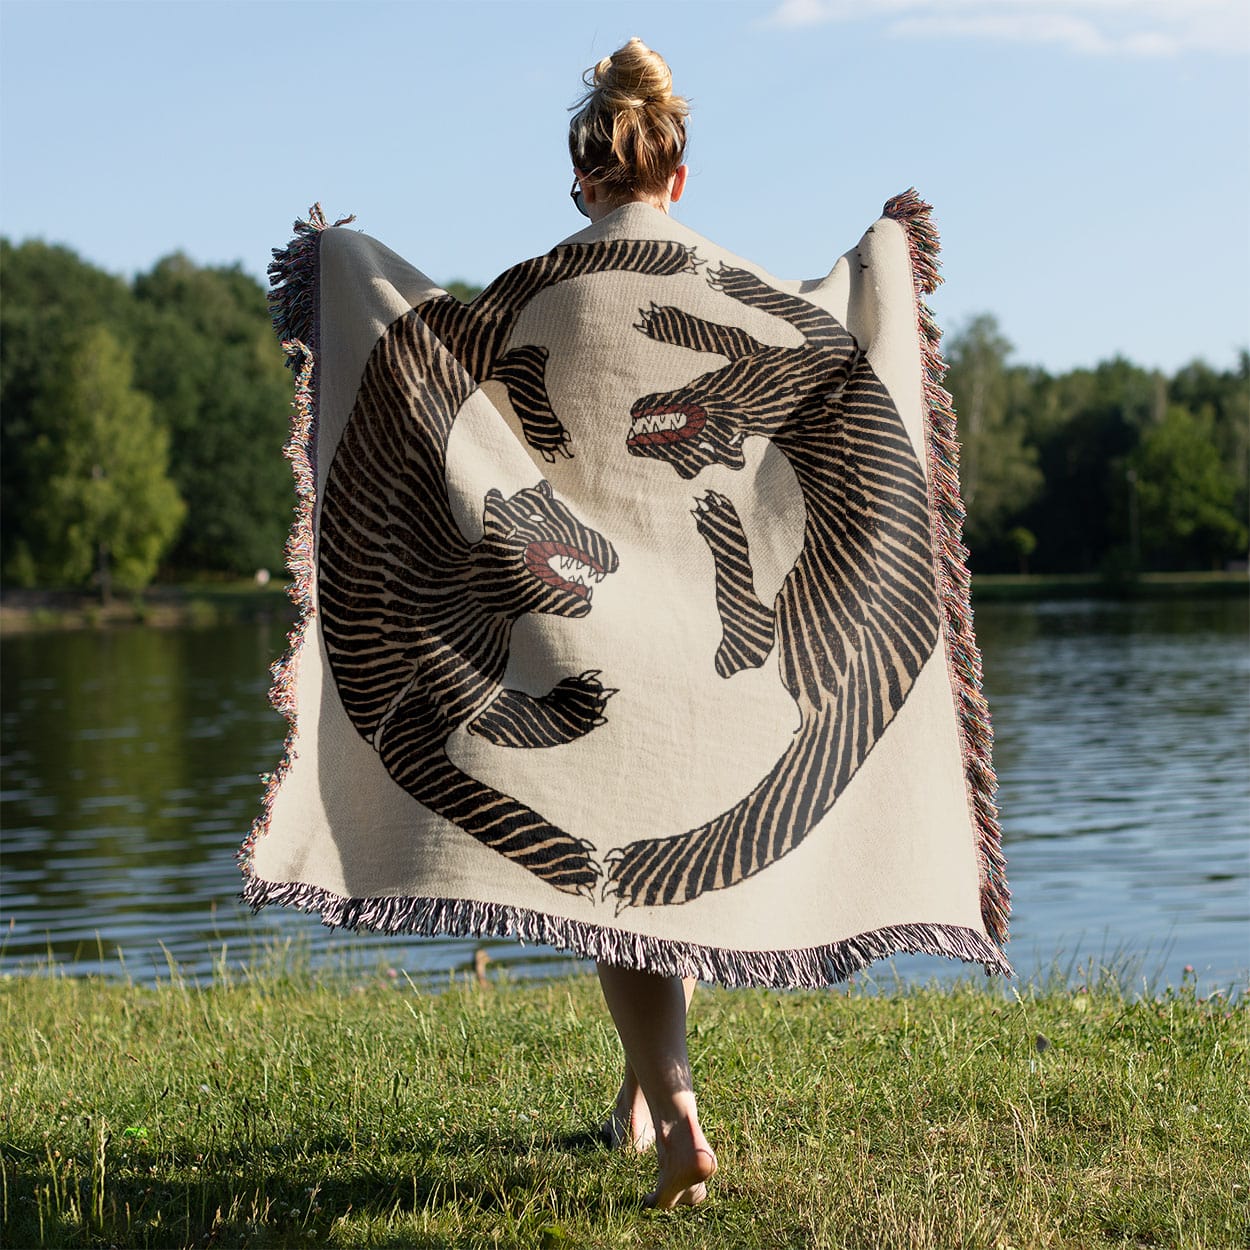 Cool Tiger Woven Blanket Held on a Woman's Back Outside